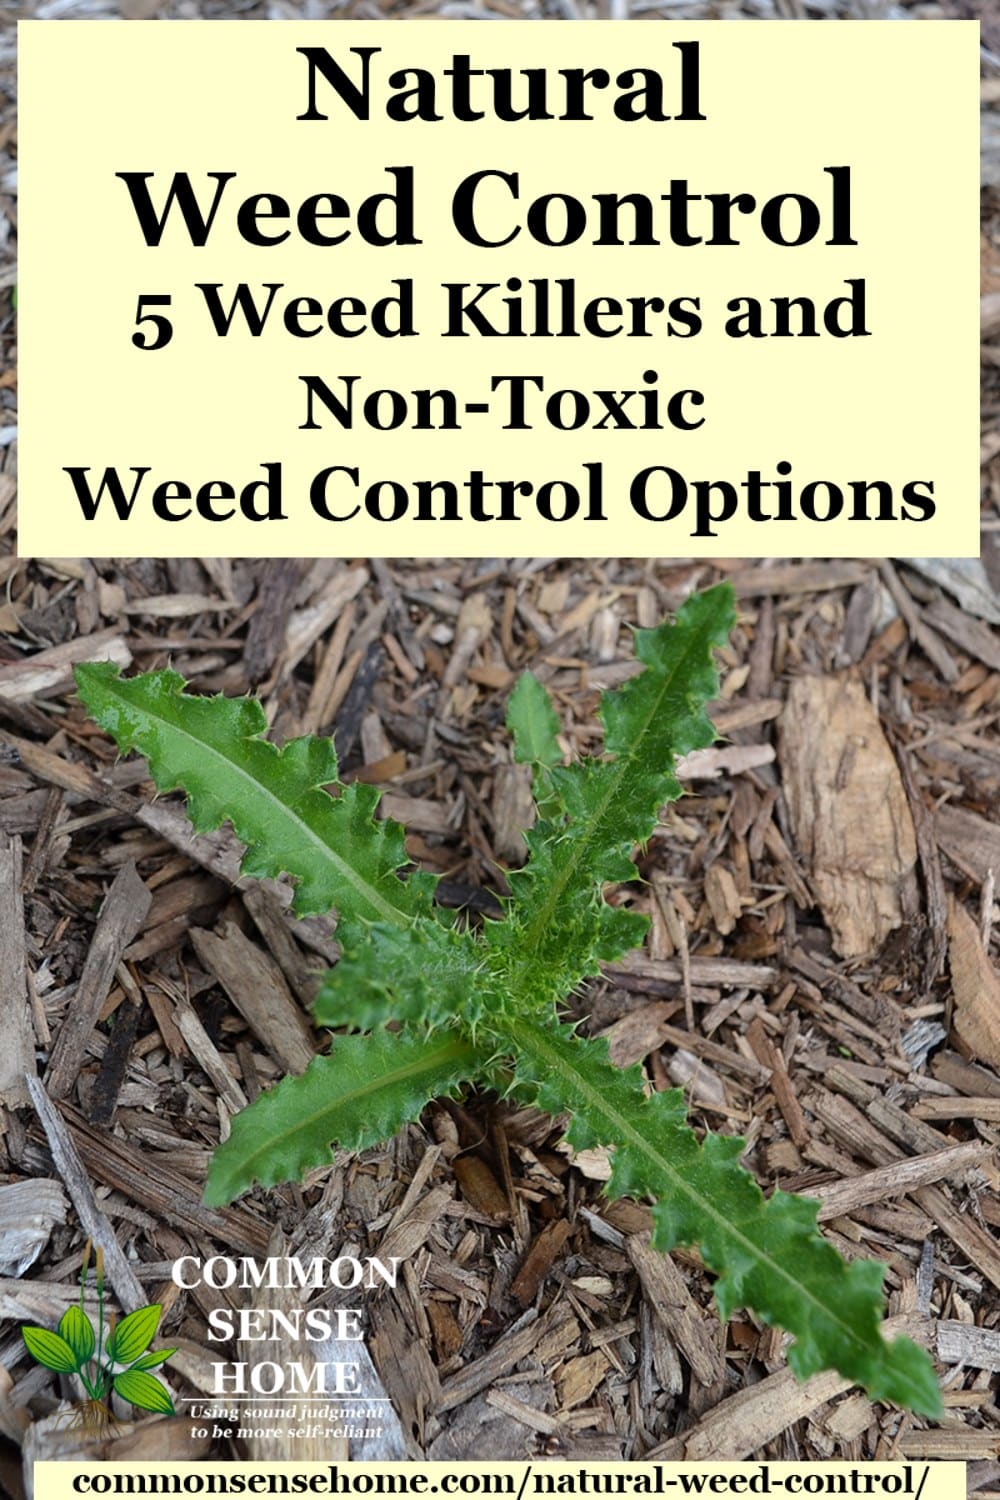 Natural Weed Control Weed Killers And Non Toxic Weed Control Options,How To Make Candles With Flowers Inside Them